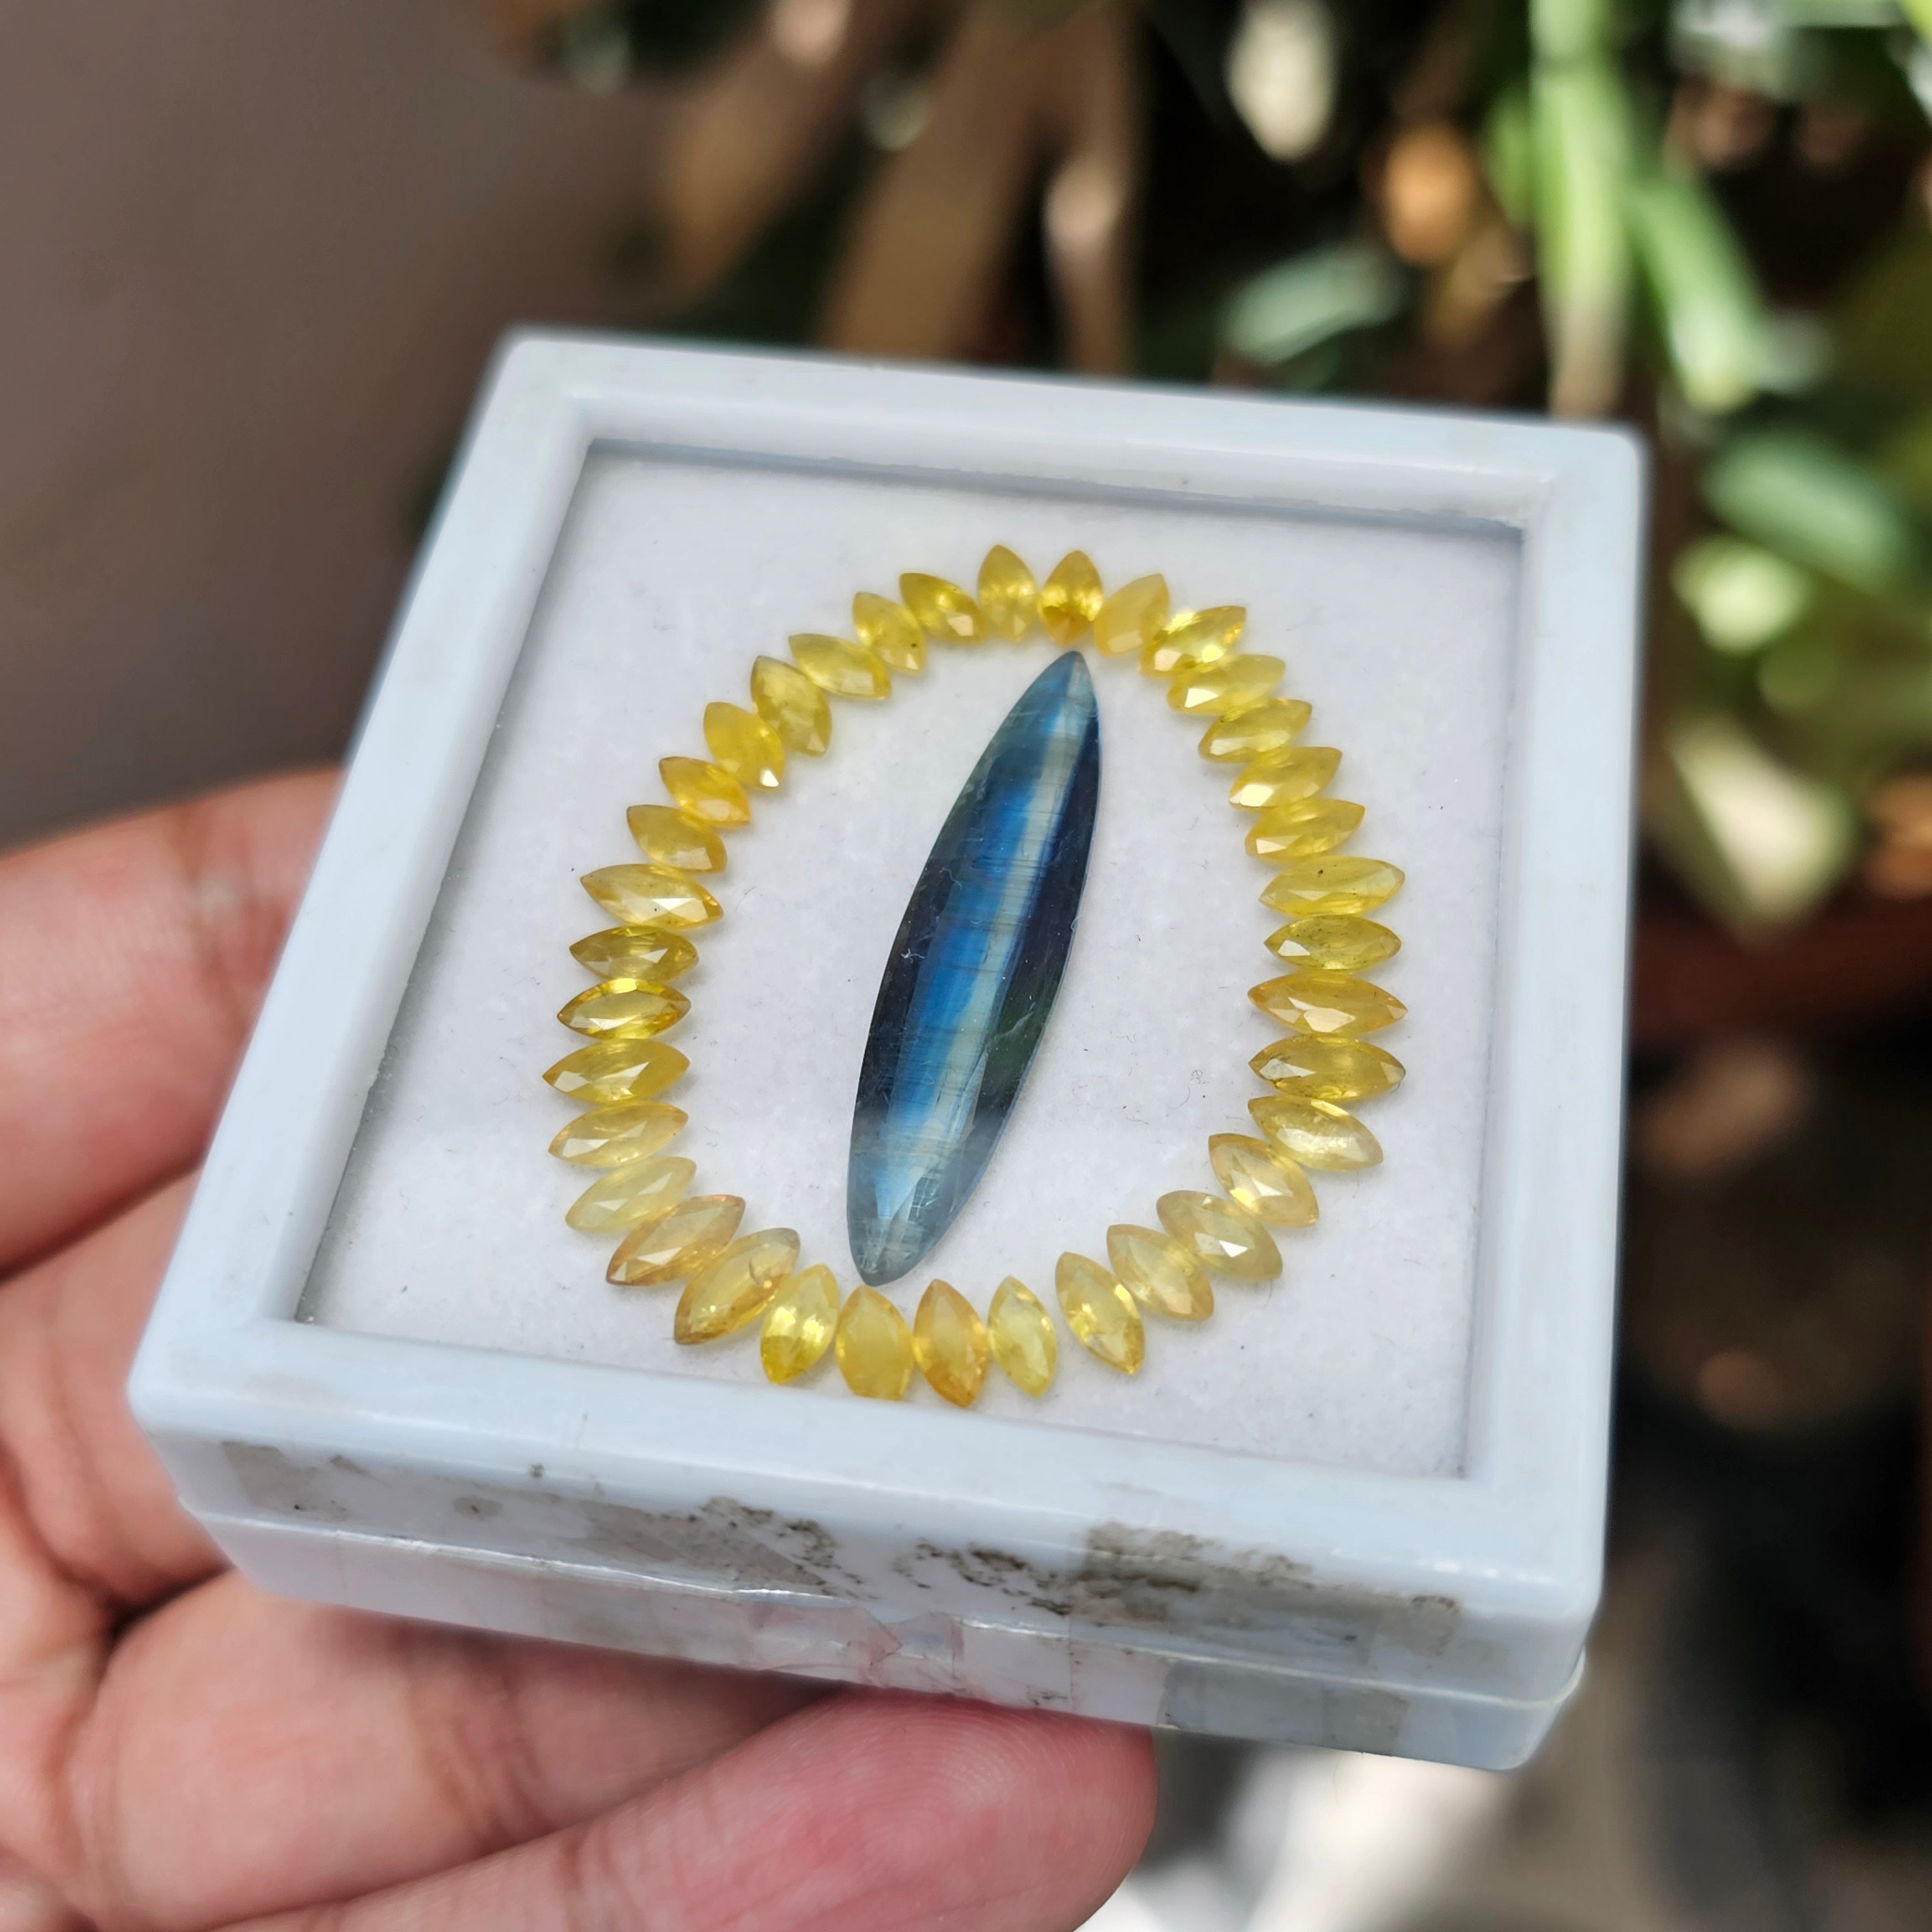 37 Pieces Natural kynite And Yellow Sapphire Faceted Gemstone Marquise Shape Size: 6-37mm - The LabradoriteKing